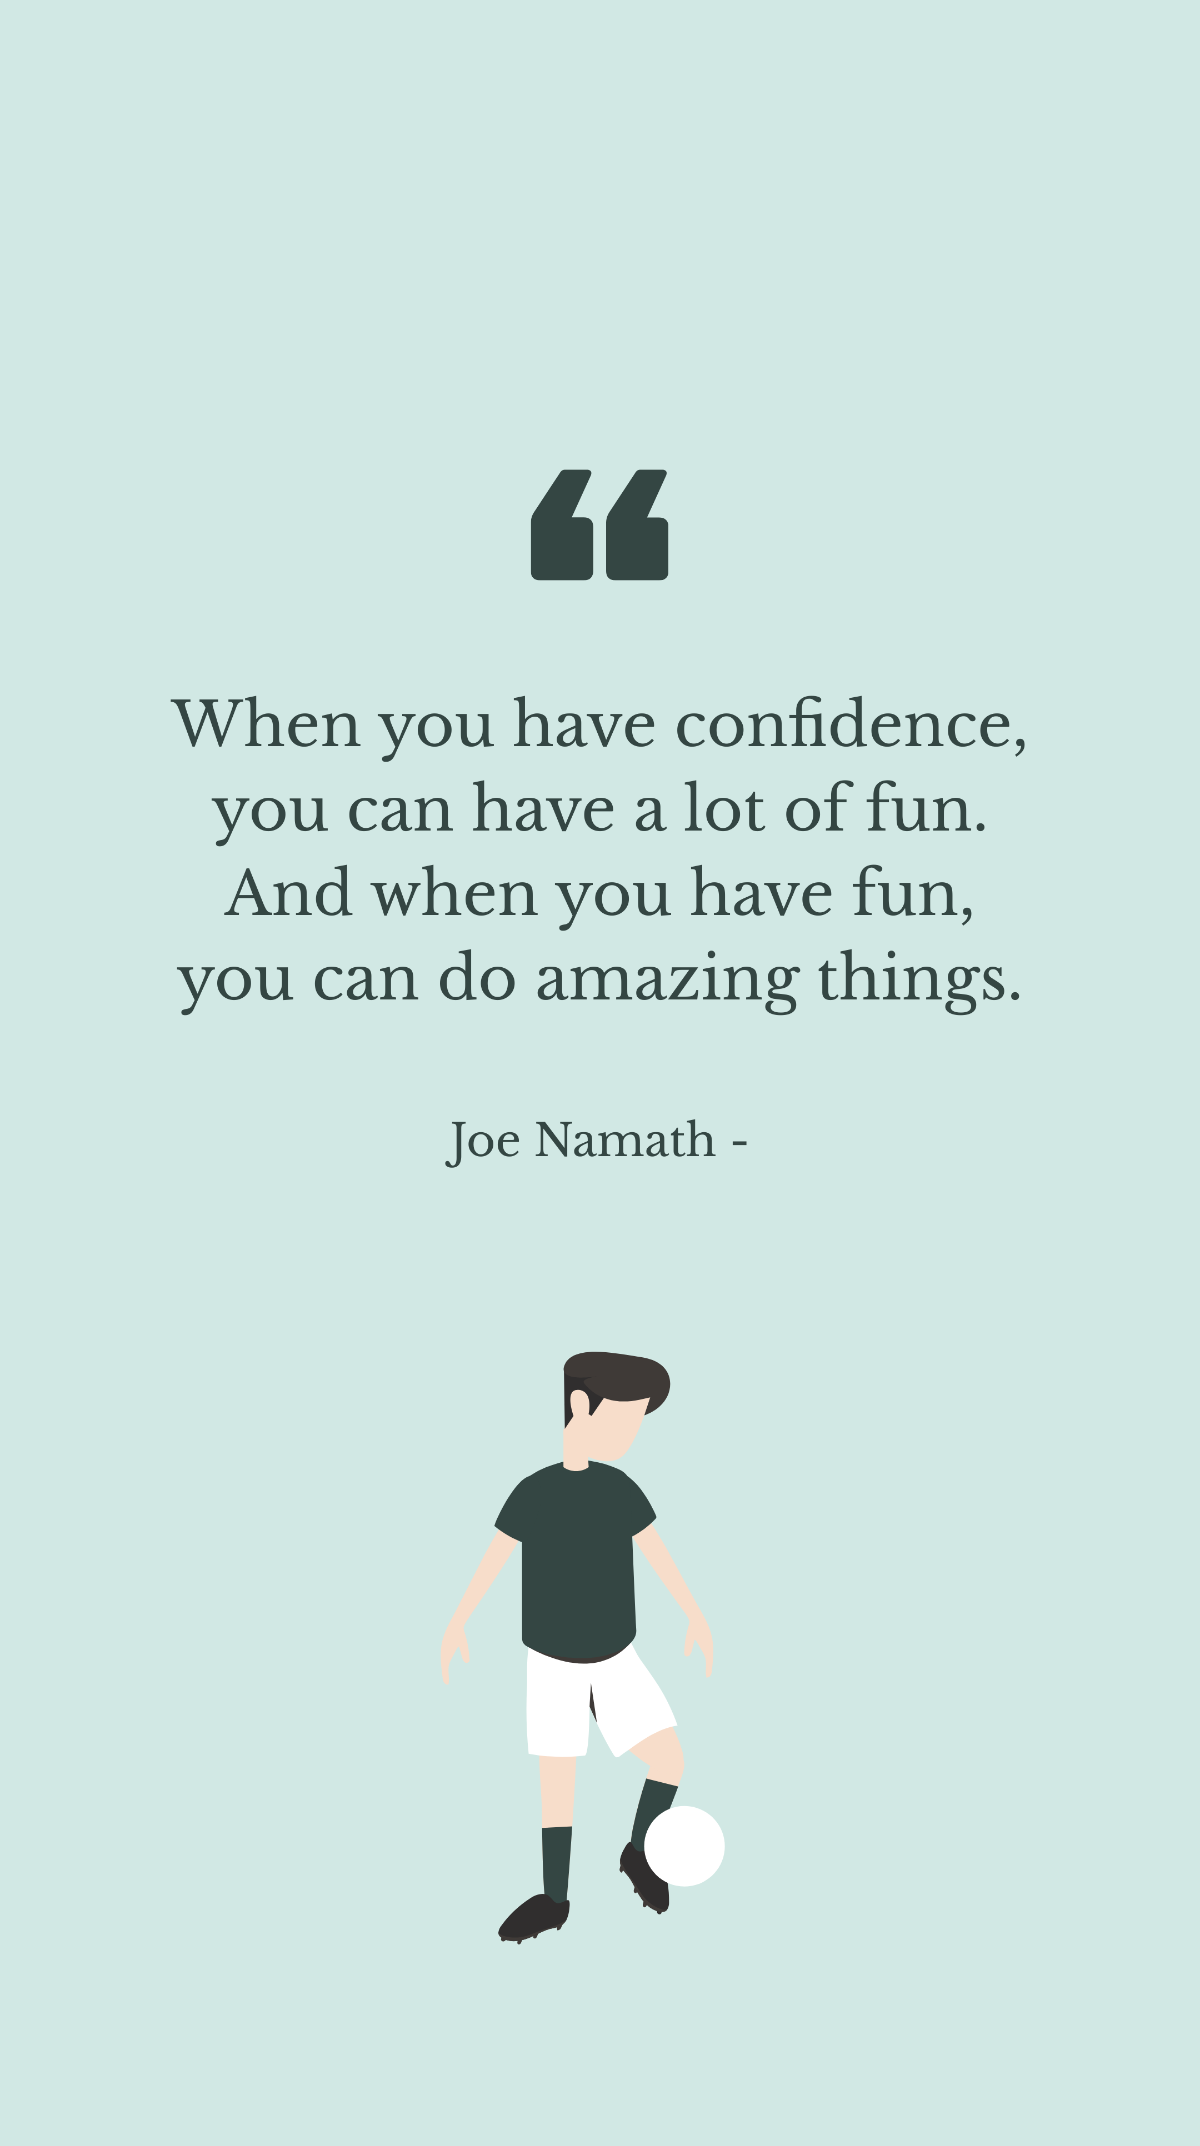 Joe Namath - When you have confidence, you can have a lot of fun. And when you have fun, you can do amazing things. Template